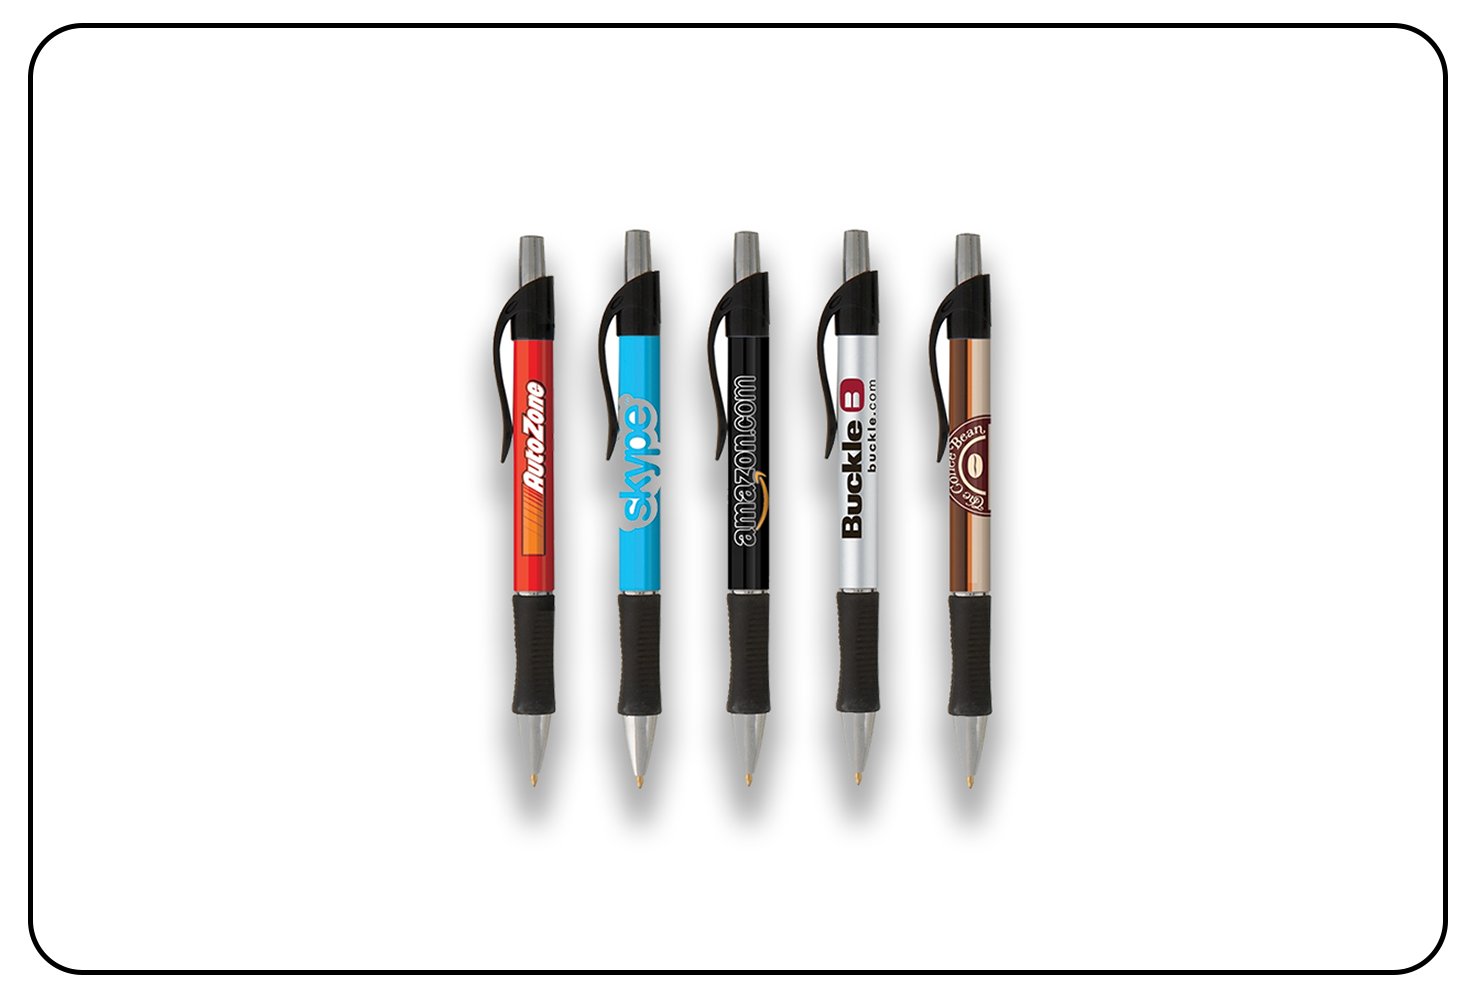 Personalized pen printing